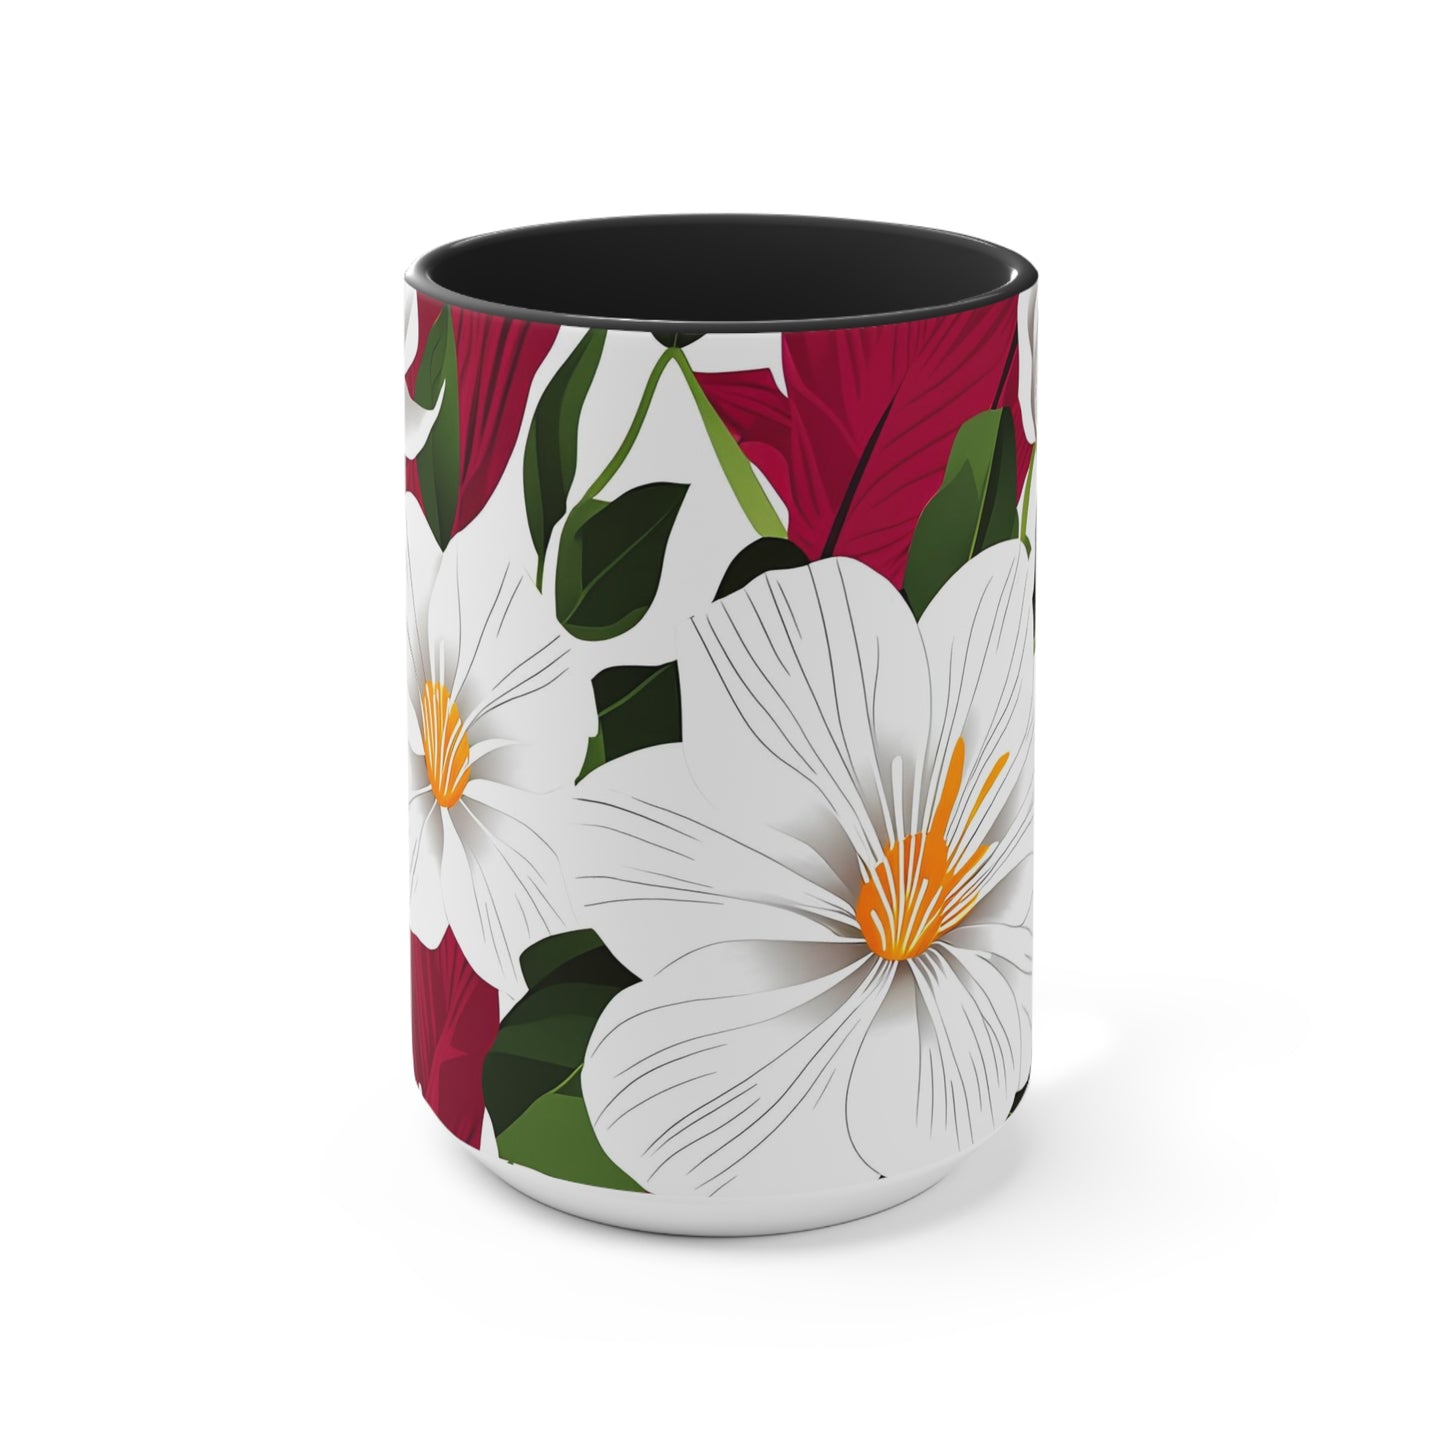 White Flowers on Red, Ceramic Mug - Perfect for Coffee, Tea, and More!